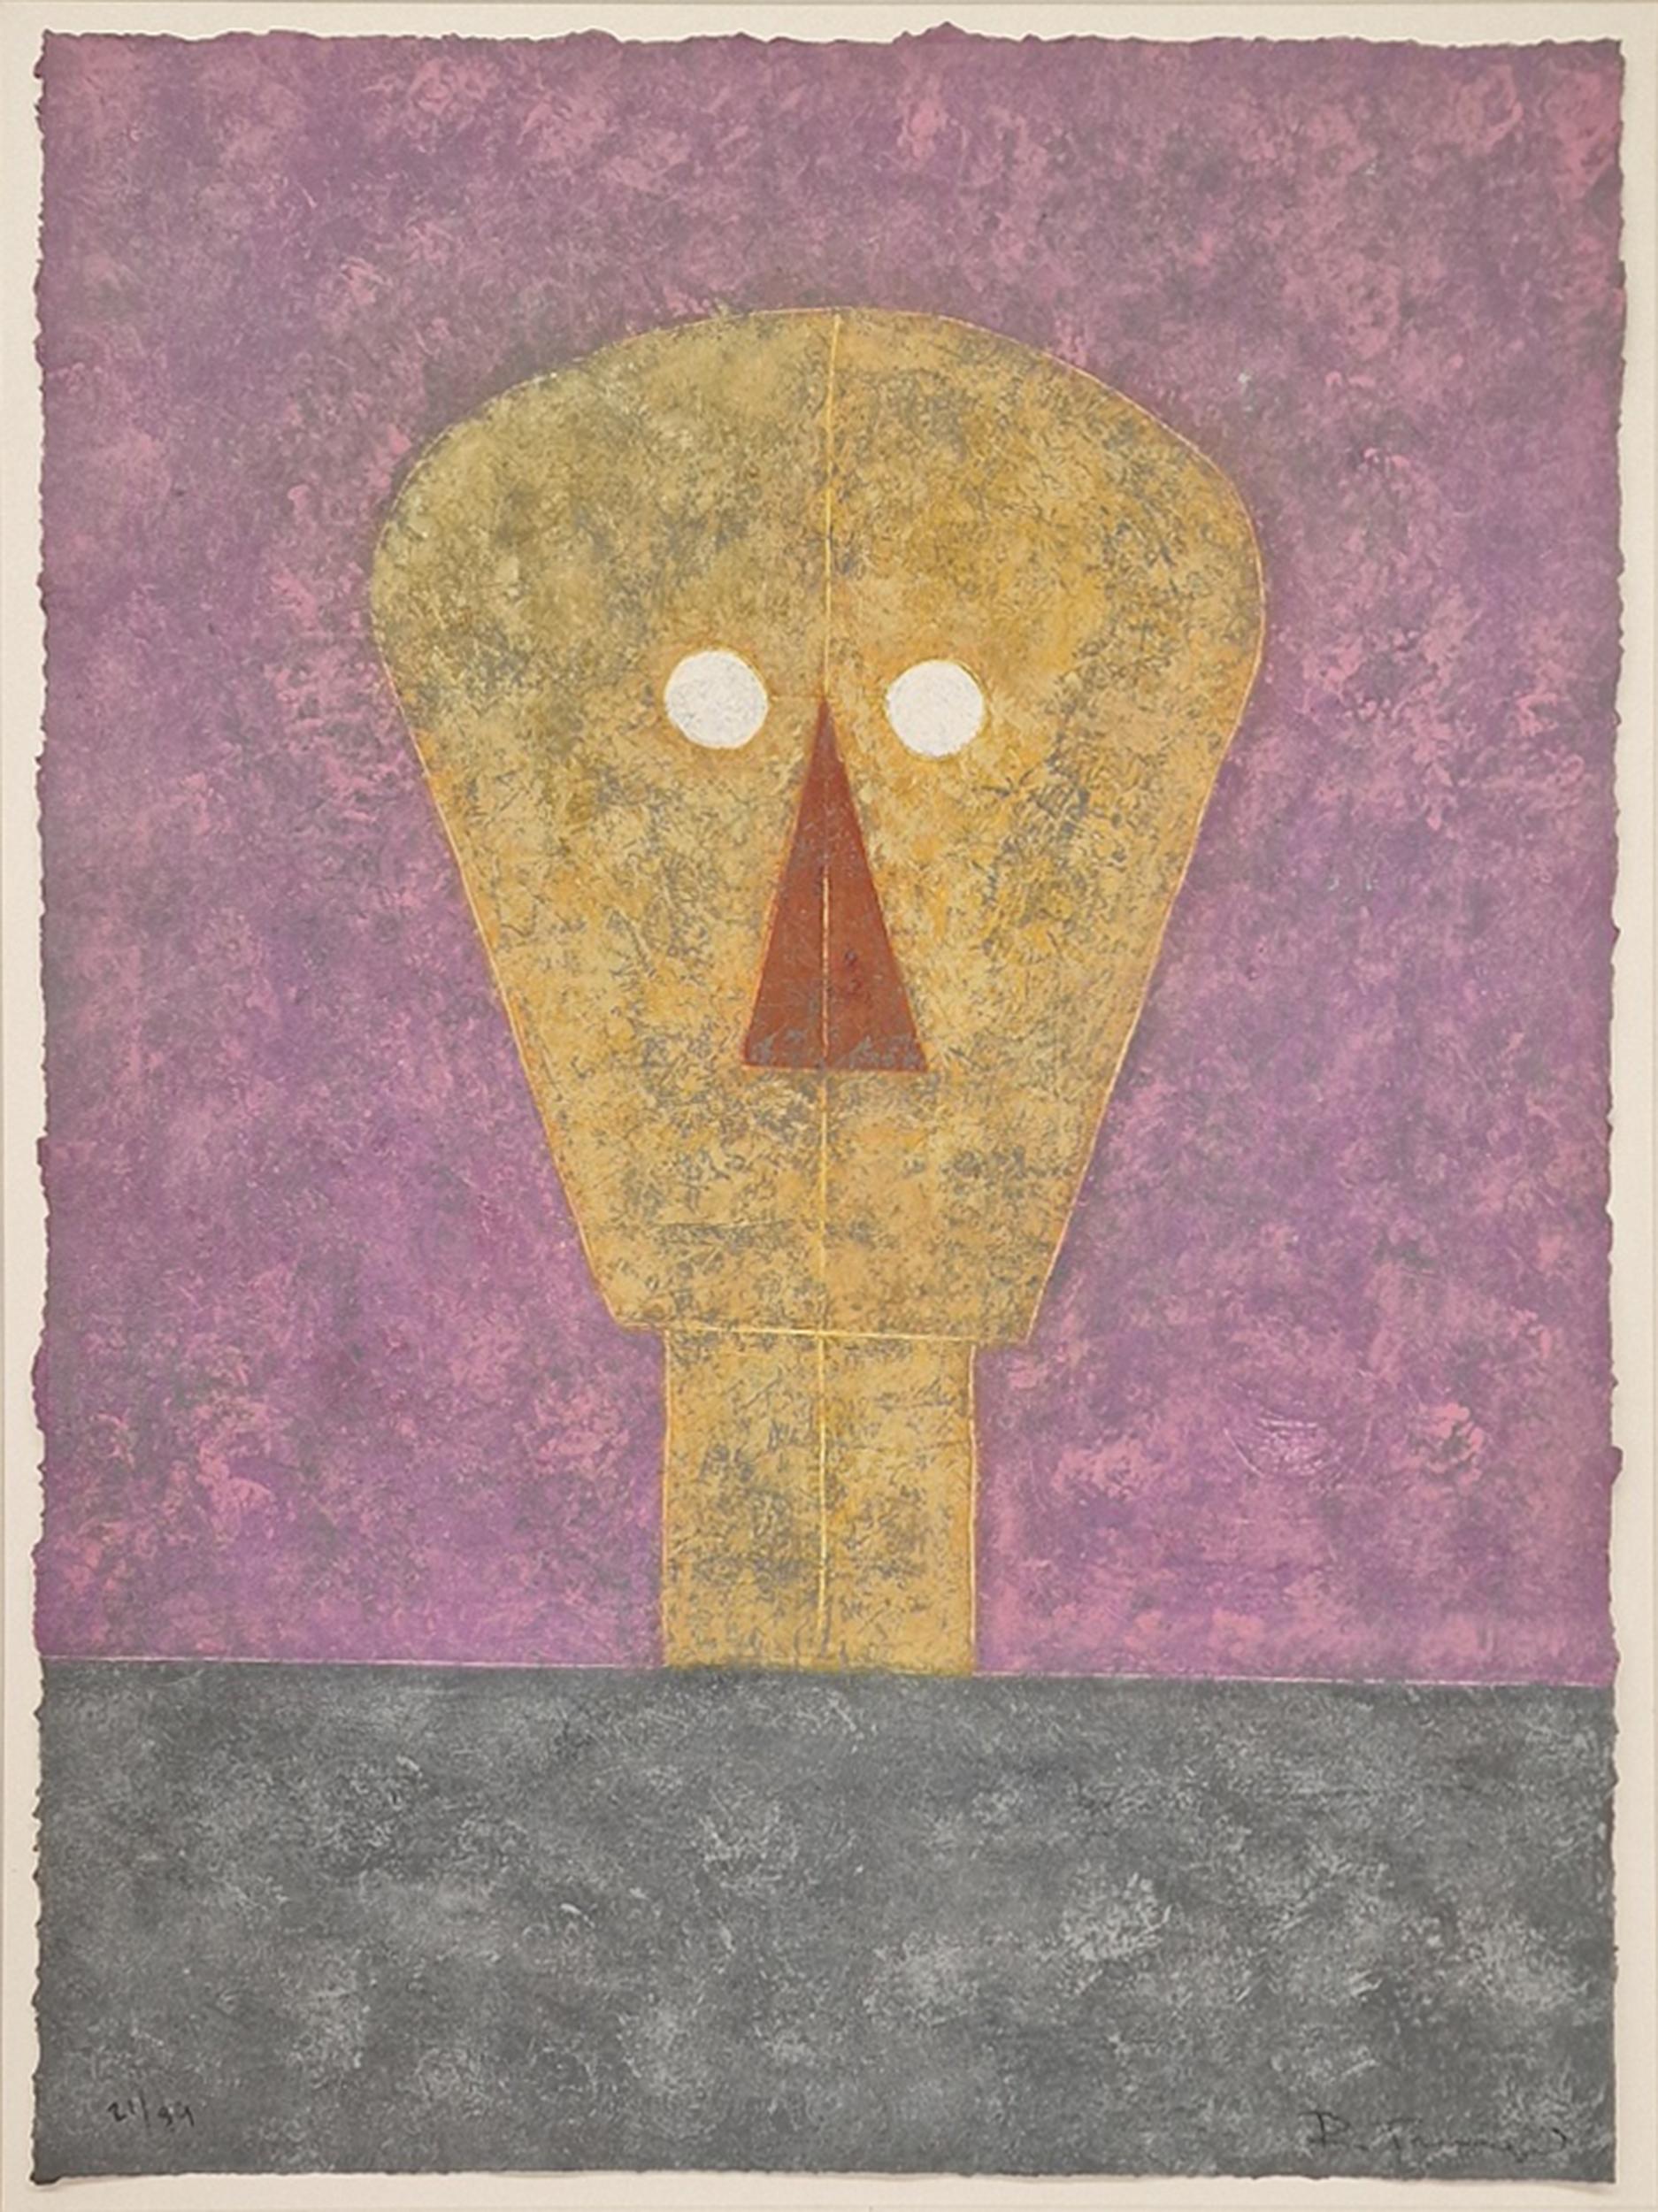 A Surrealist etching by Mexican artist Rufino Tamayo of a simple yellow figure against a pink  background, staring at the viewer with piercing white eyes. This piece is 21 of 99 numbered editions. This piece is signed in pencil by the artist.

Cabez